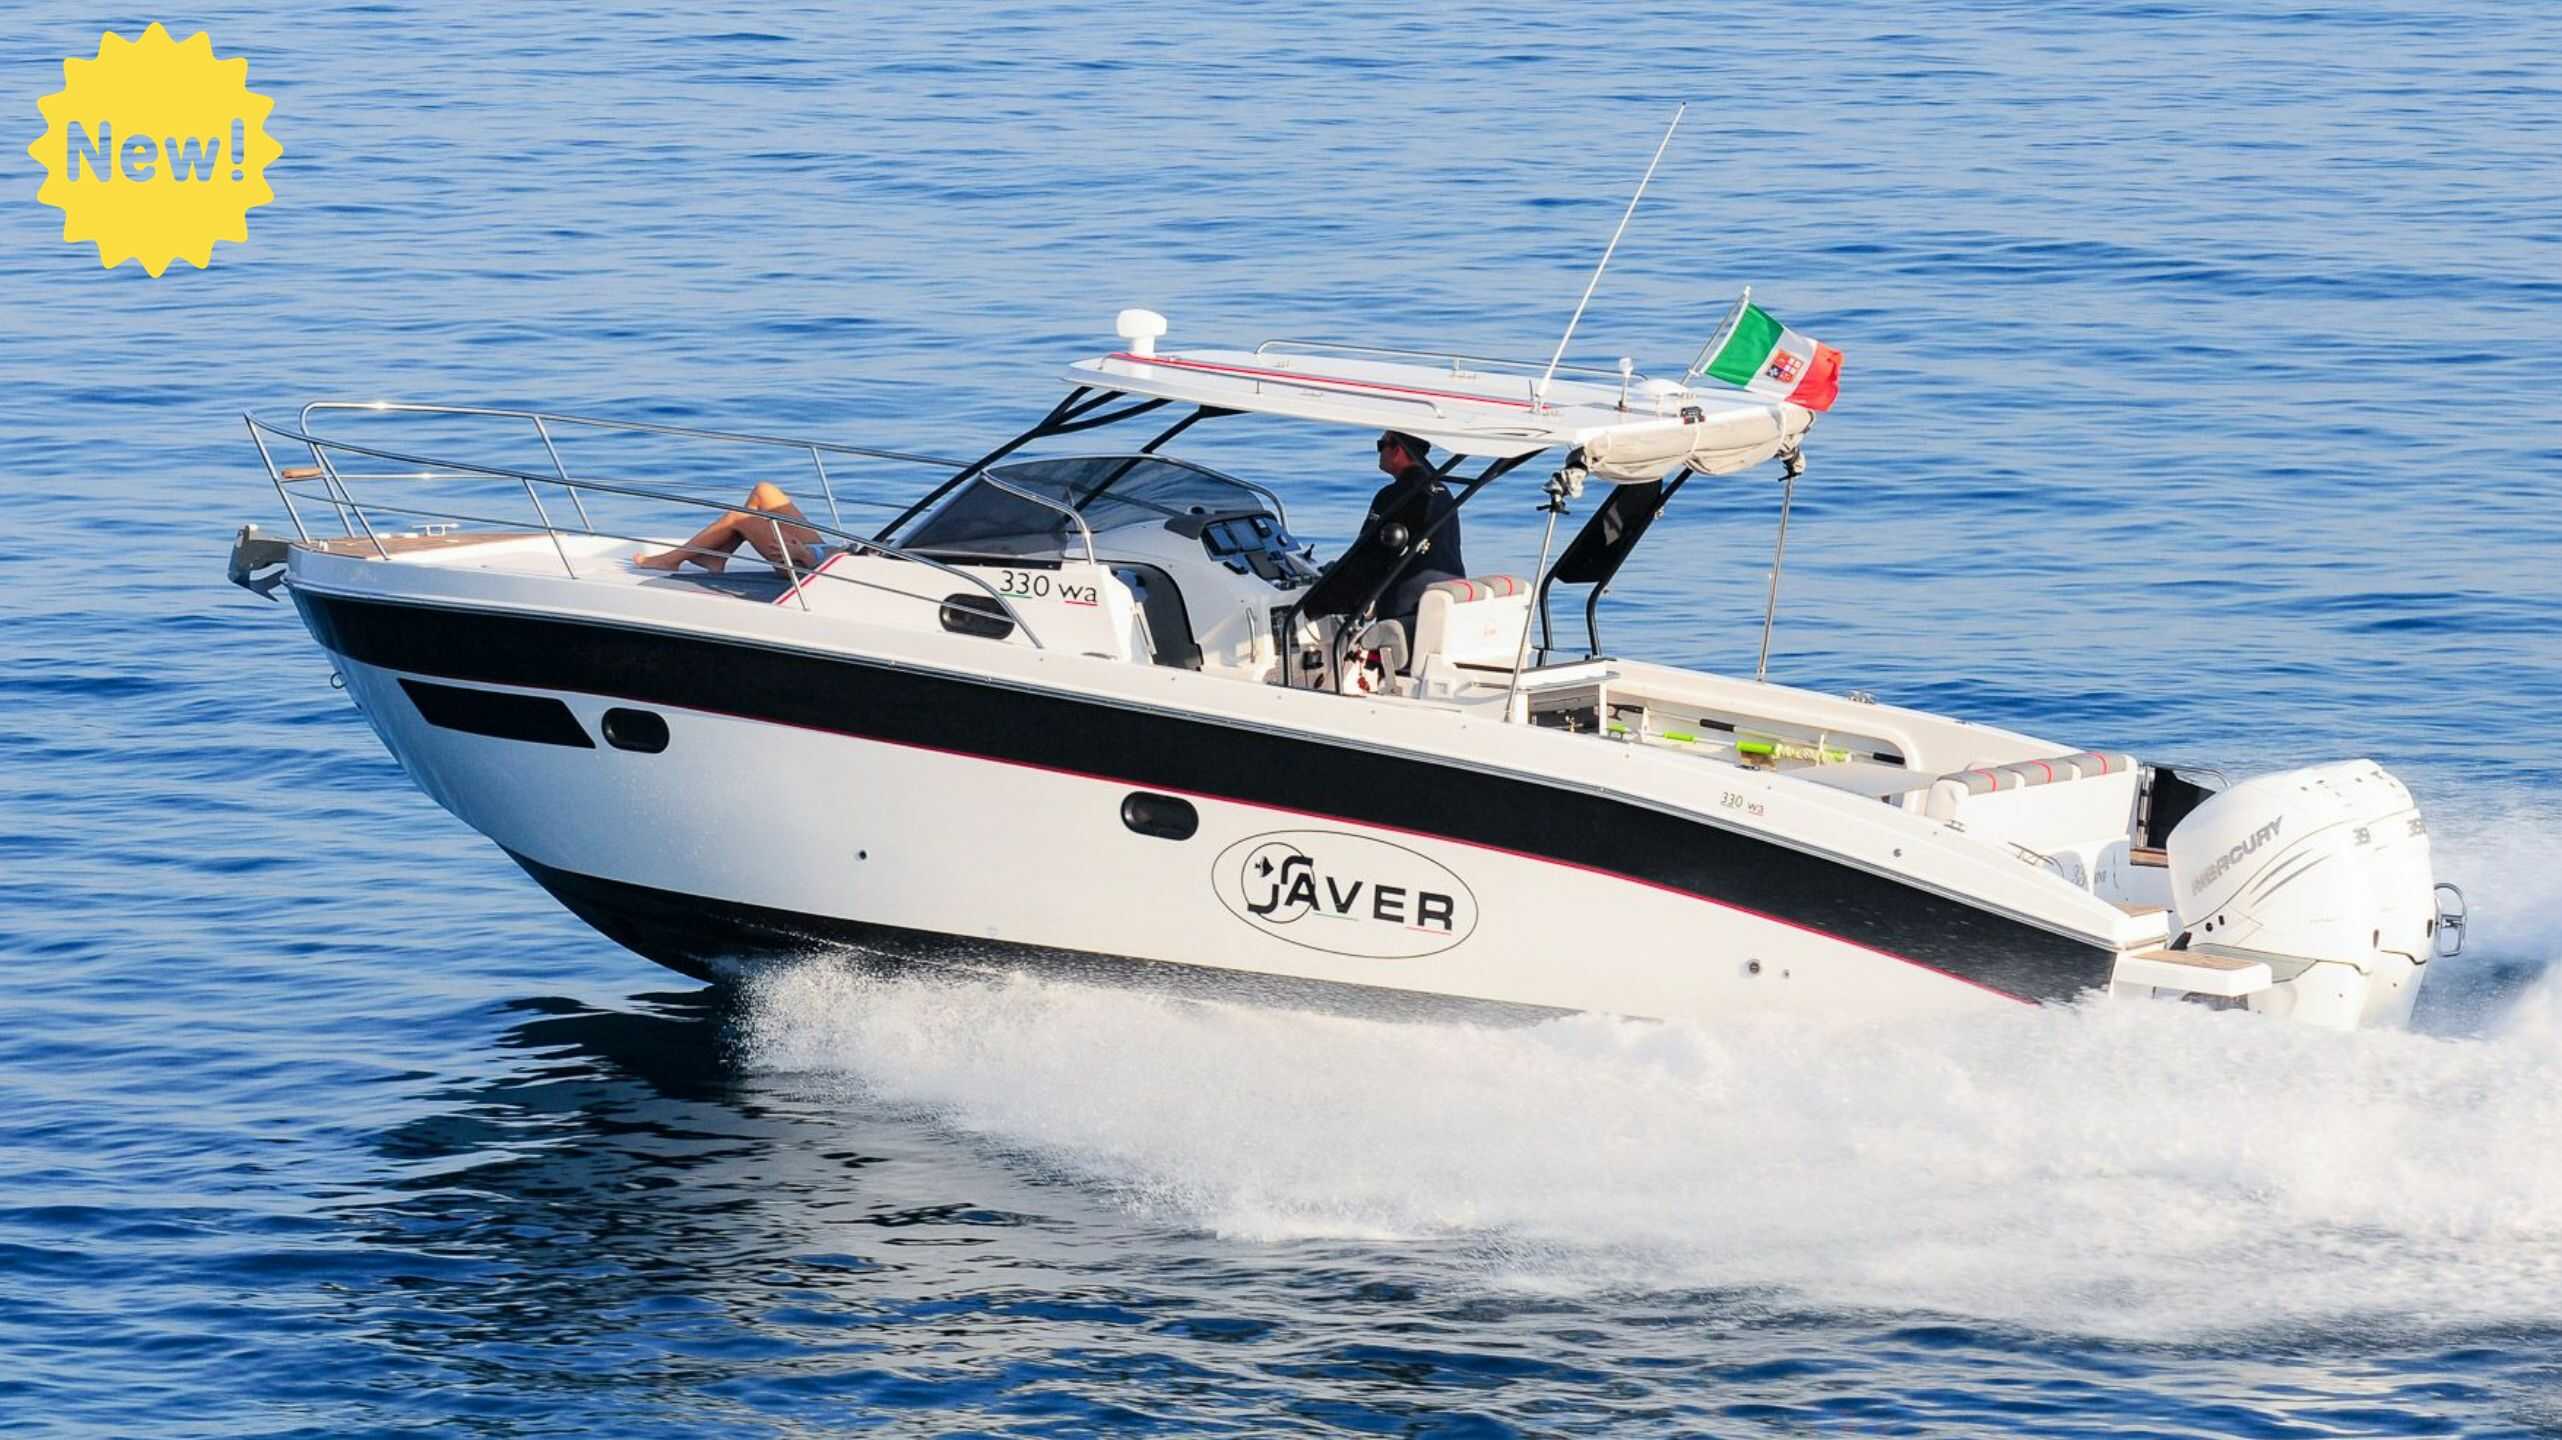 Saver 330 (with cabin) 500hp with boat license 11mt (Max: 12 People)